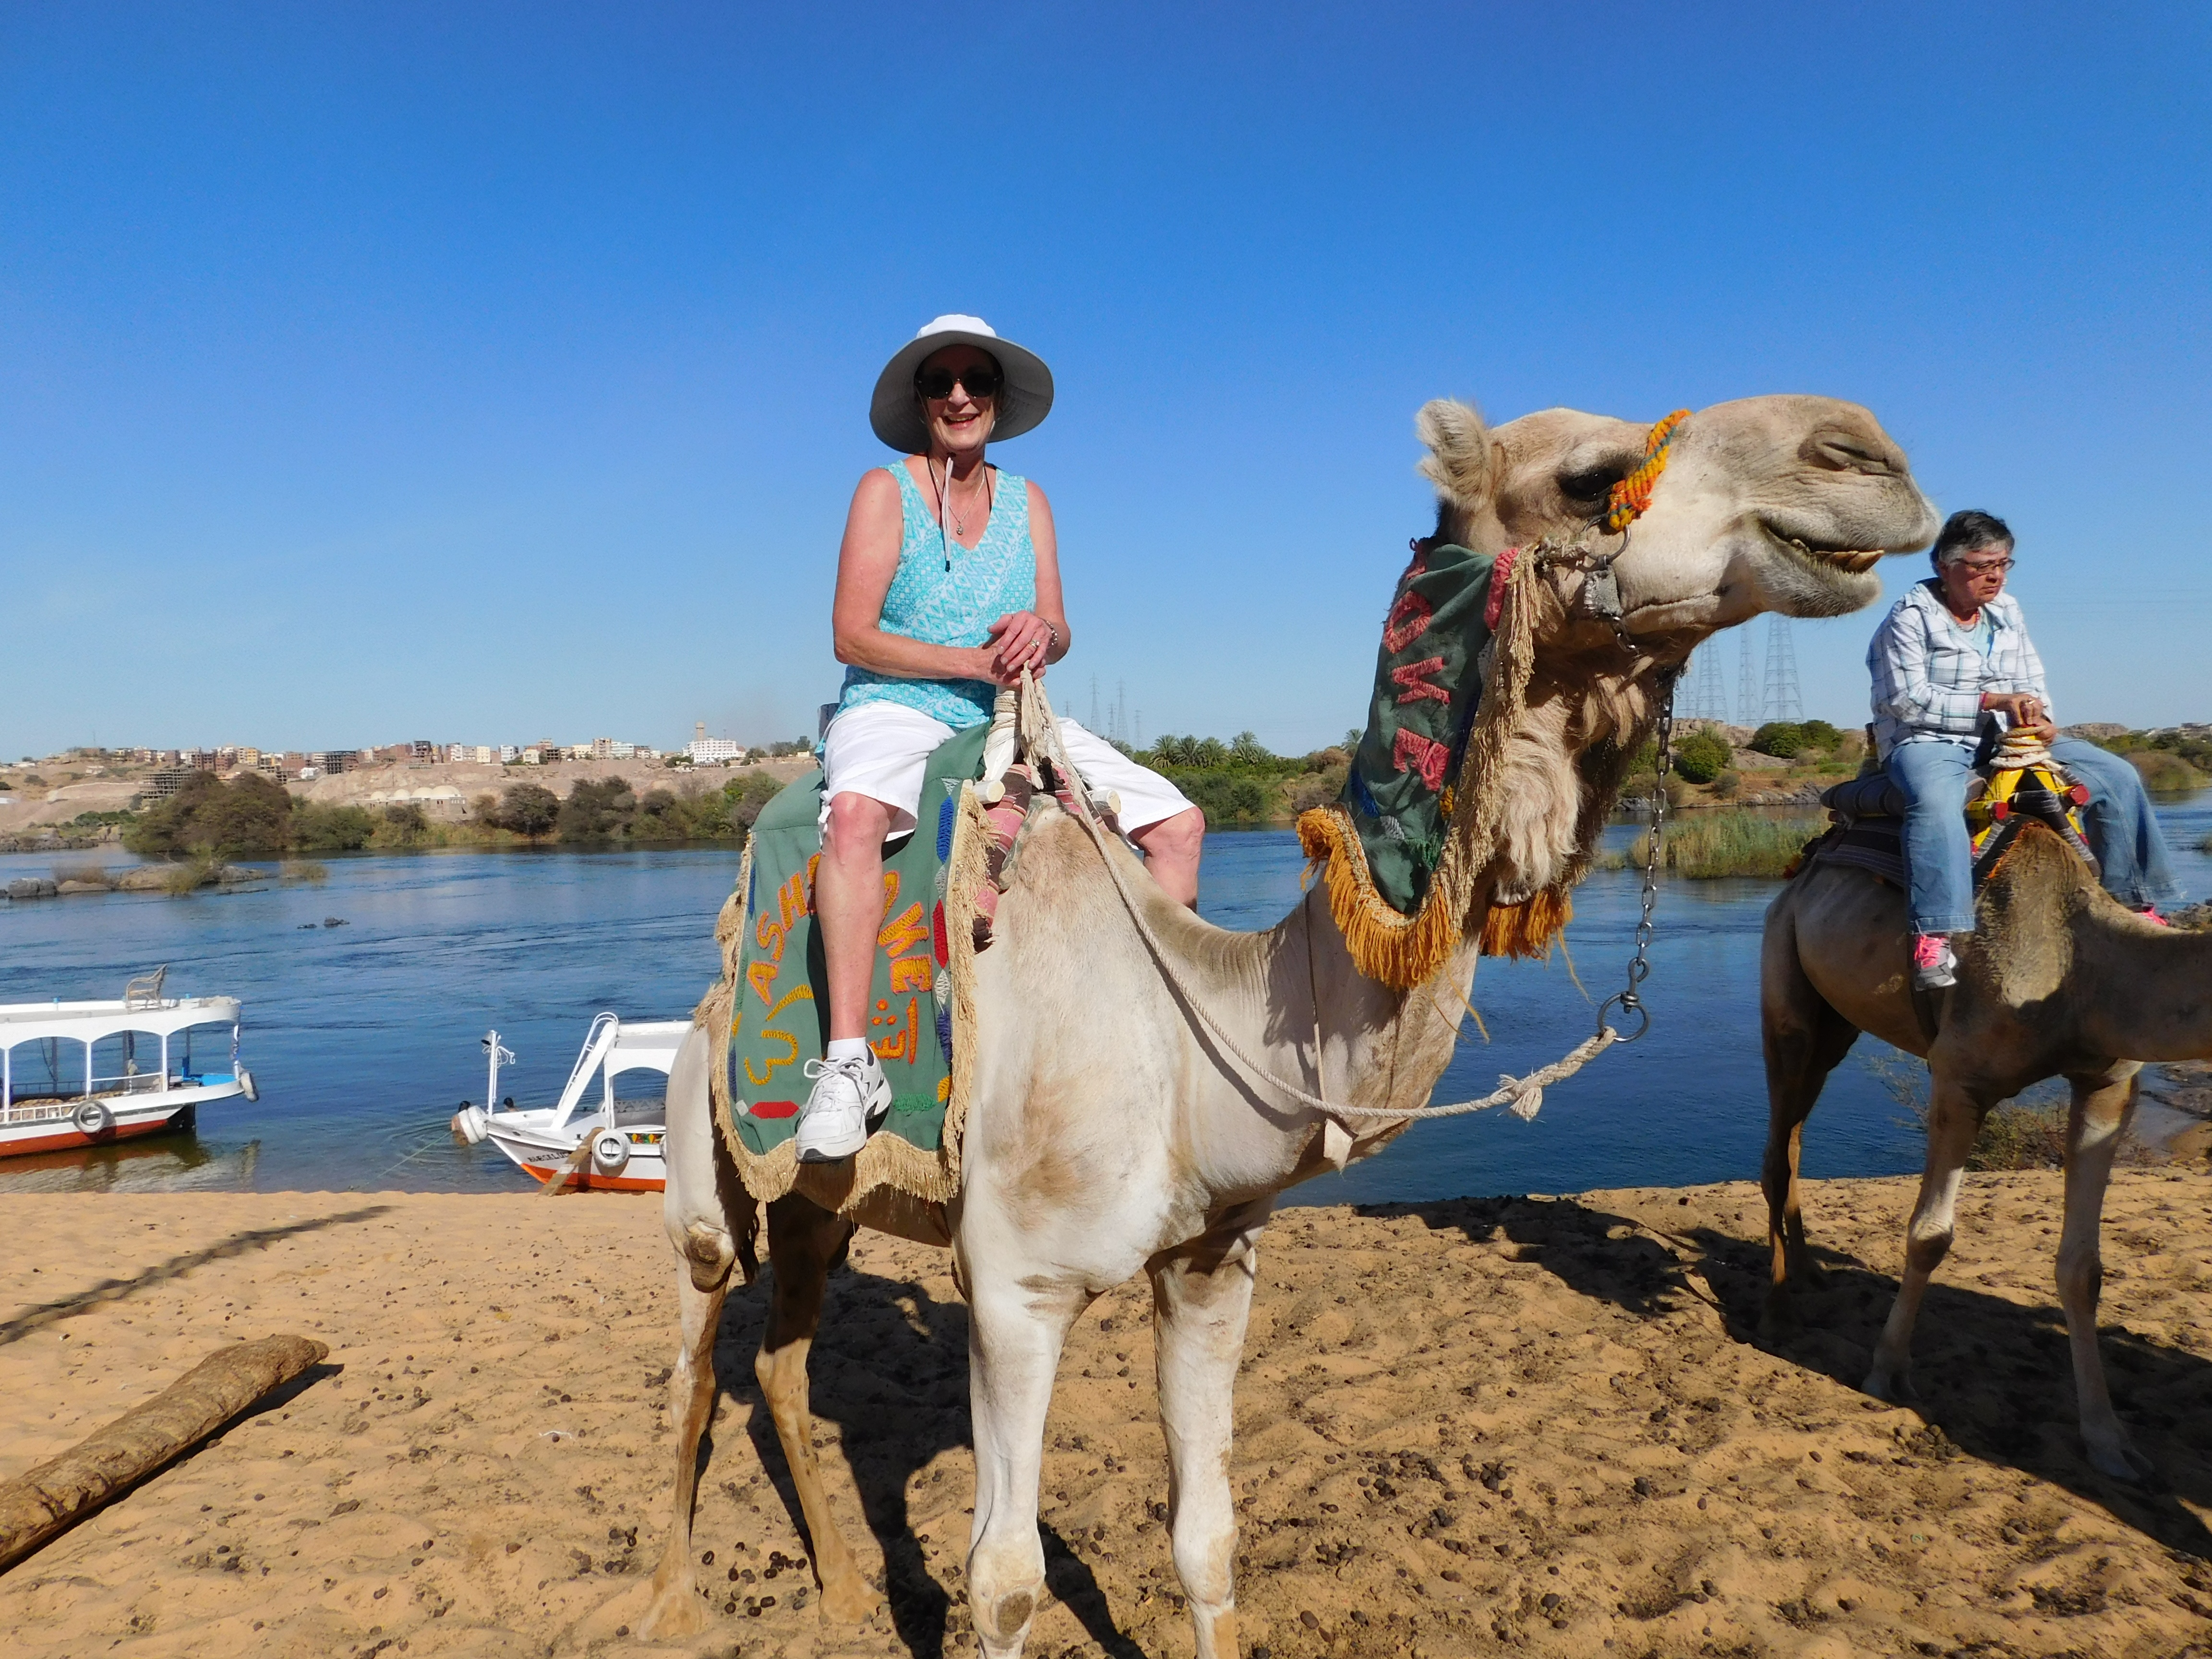 Camel ride on shore
of the Nile River